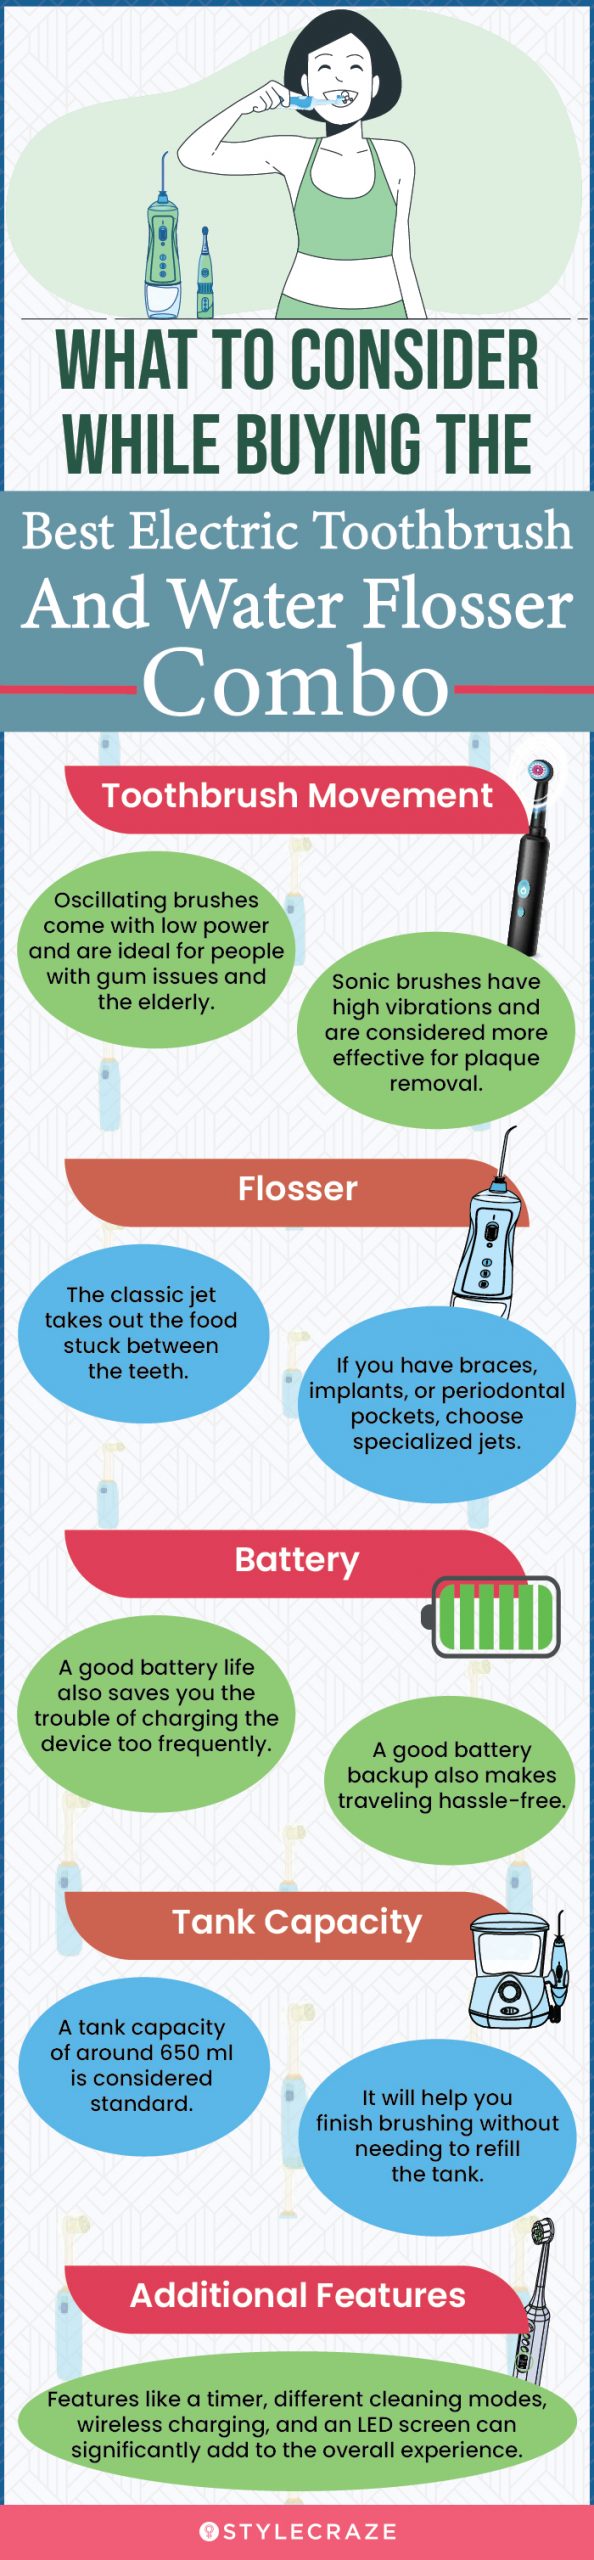 What To Consider While Buying The Best Electric Toothbrush And Water Flosser Combo (infographic)